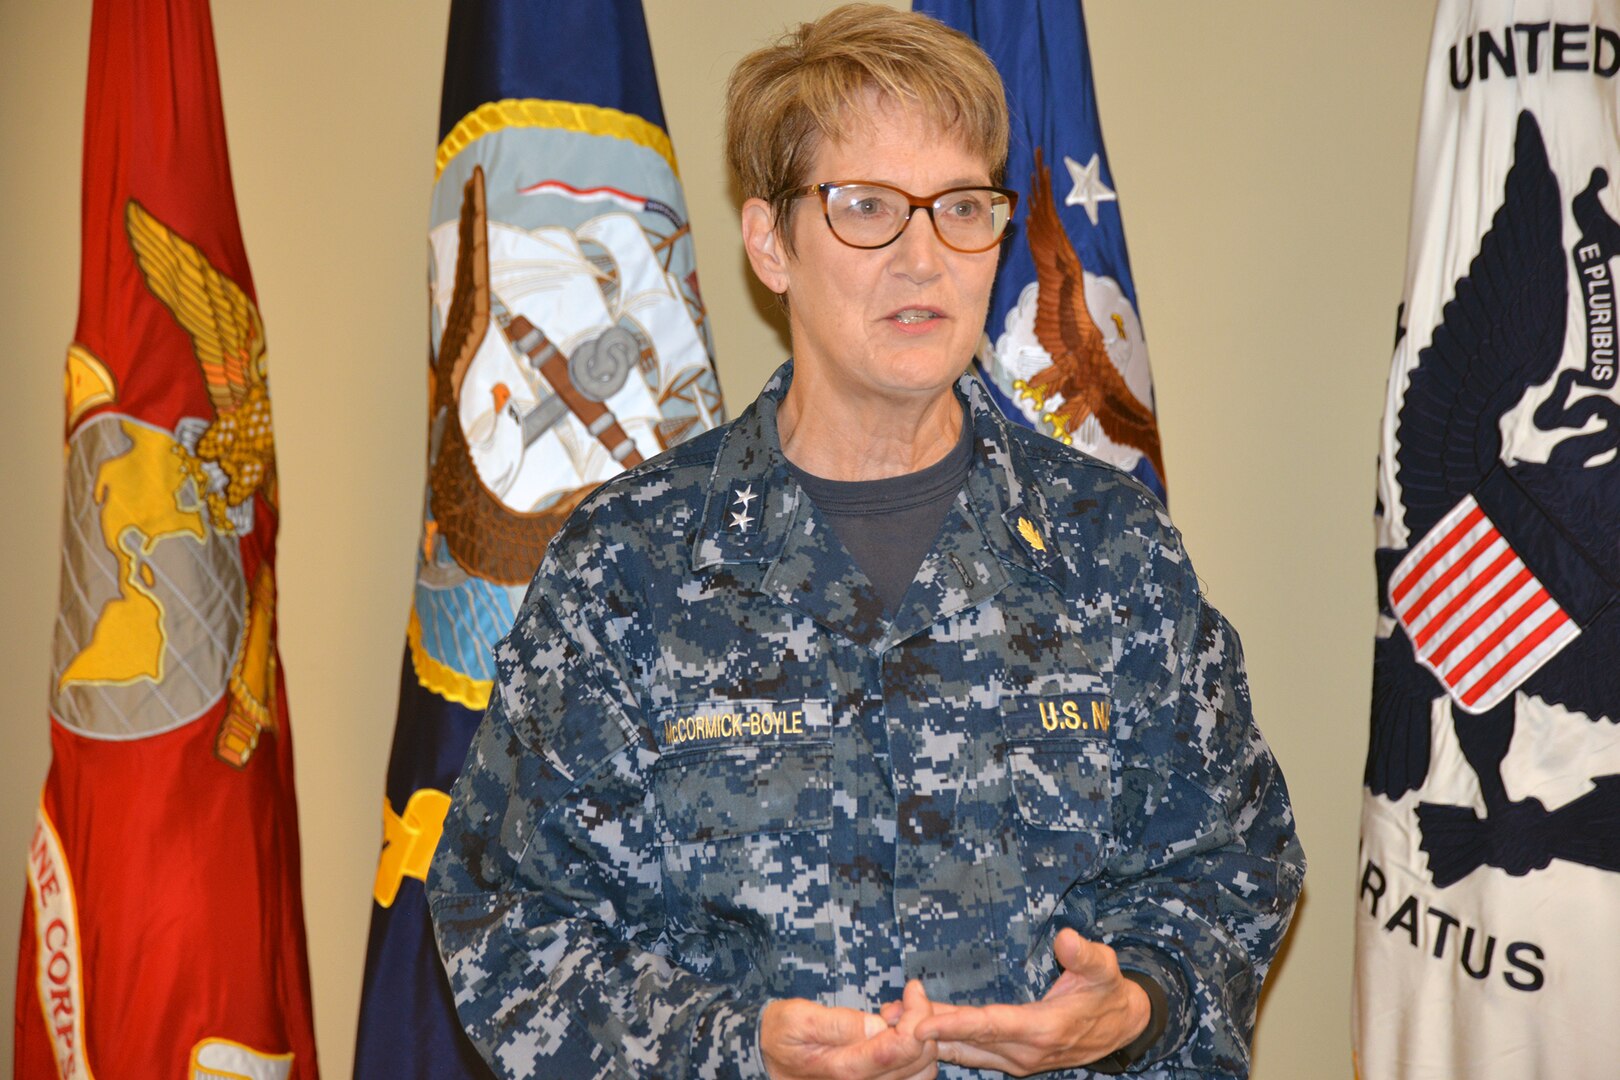 Rear Adm. Rebecca J. McCormick-Boyle, commander, Navy Medicine Education and Training Command at Joint Base San Antonio-Fort Sam Houston, speaks to delegates and others at the opening session of the Armed Forces Action Program annual forum, held at the Installation Management Command Academy Oct. 3-6.